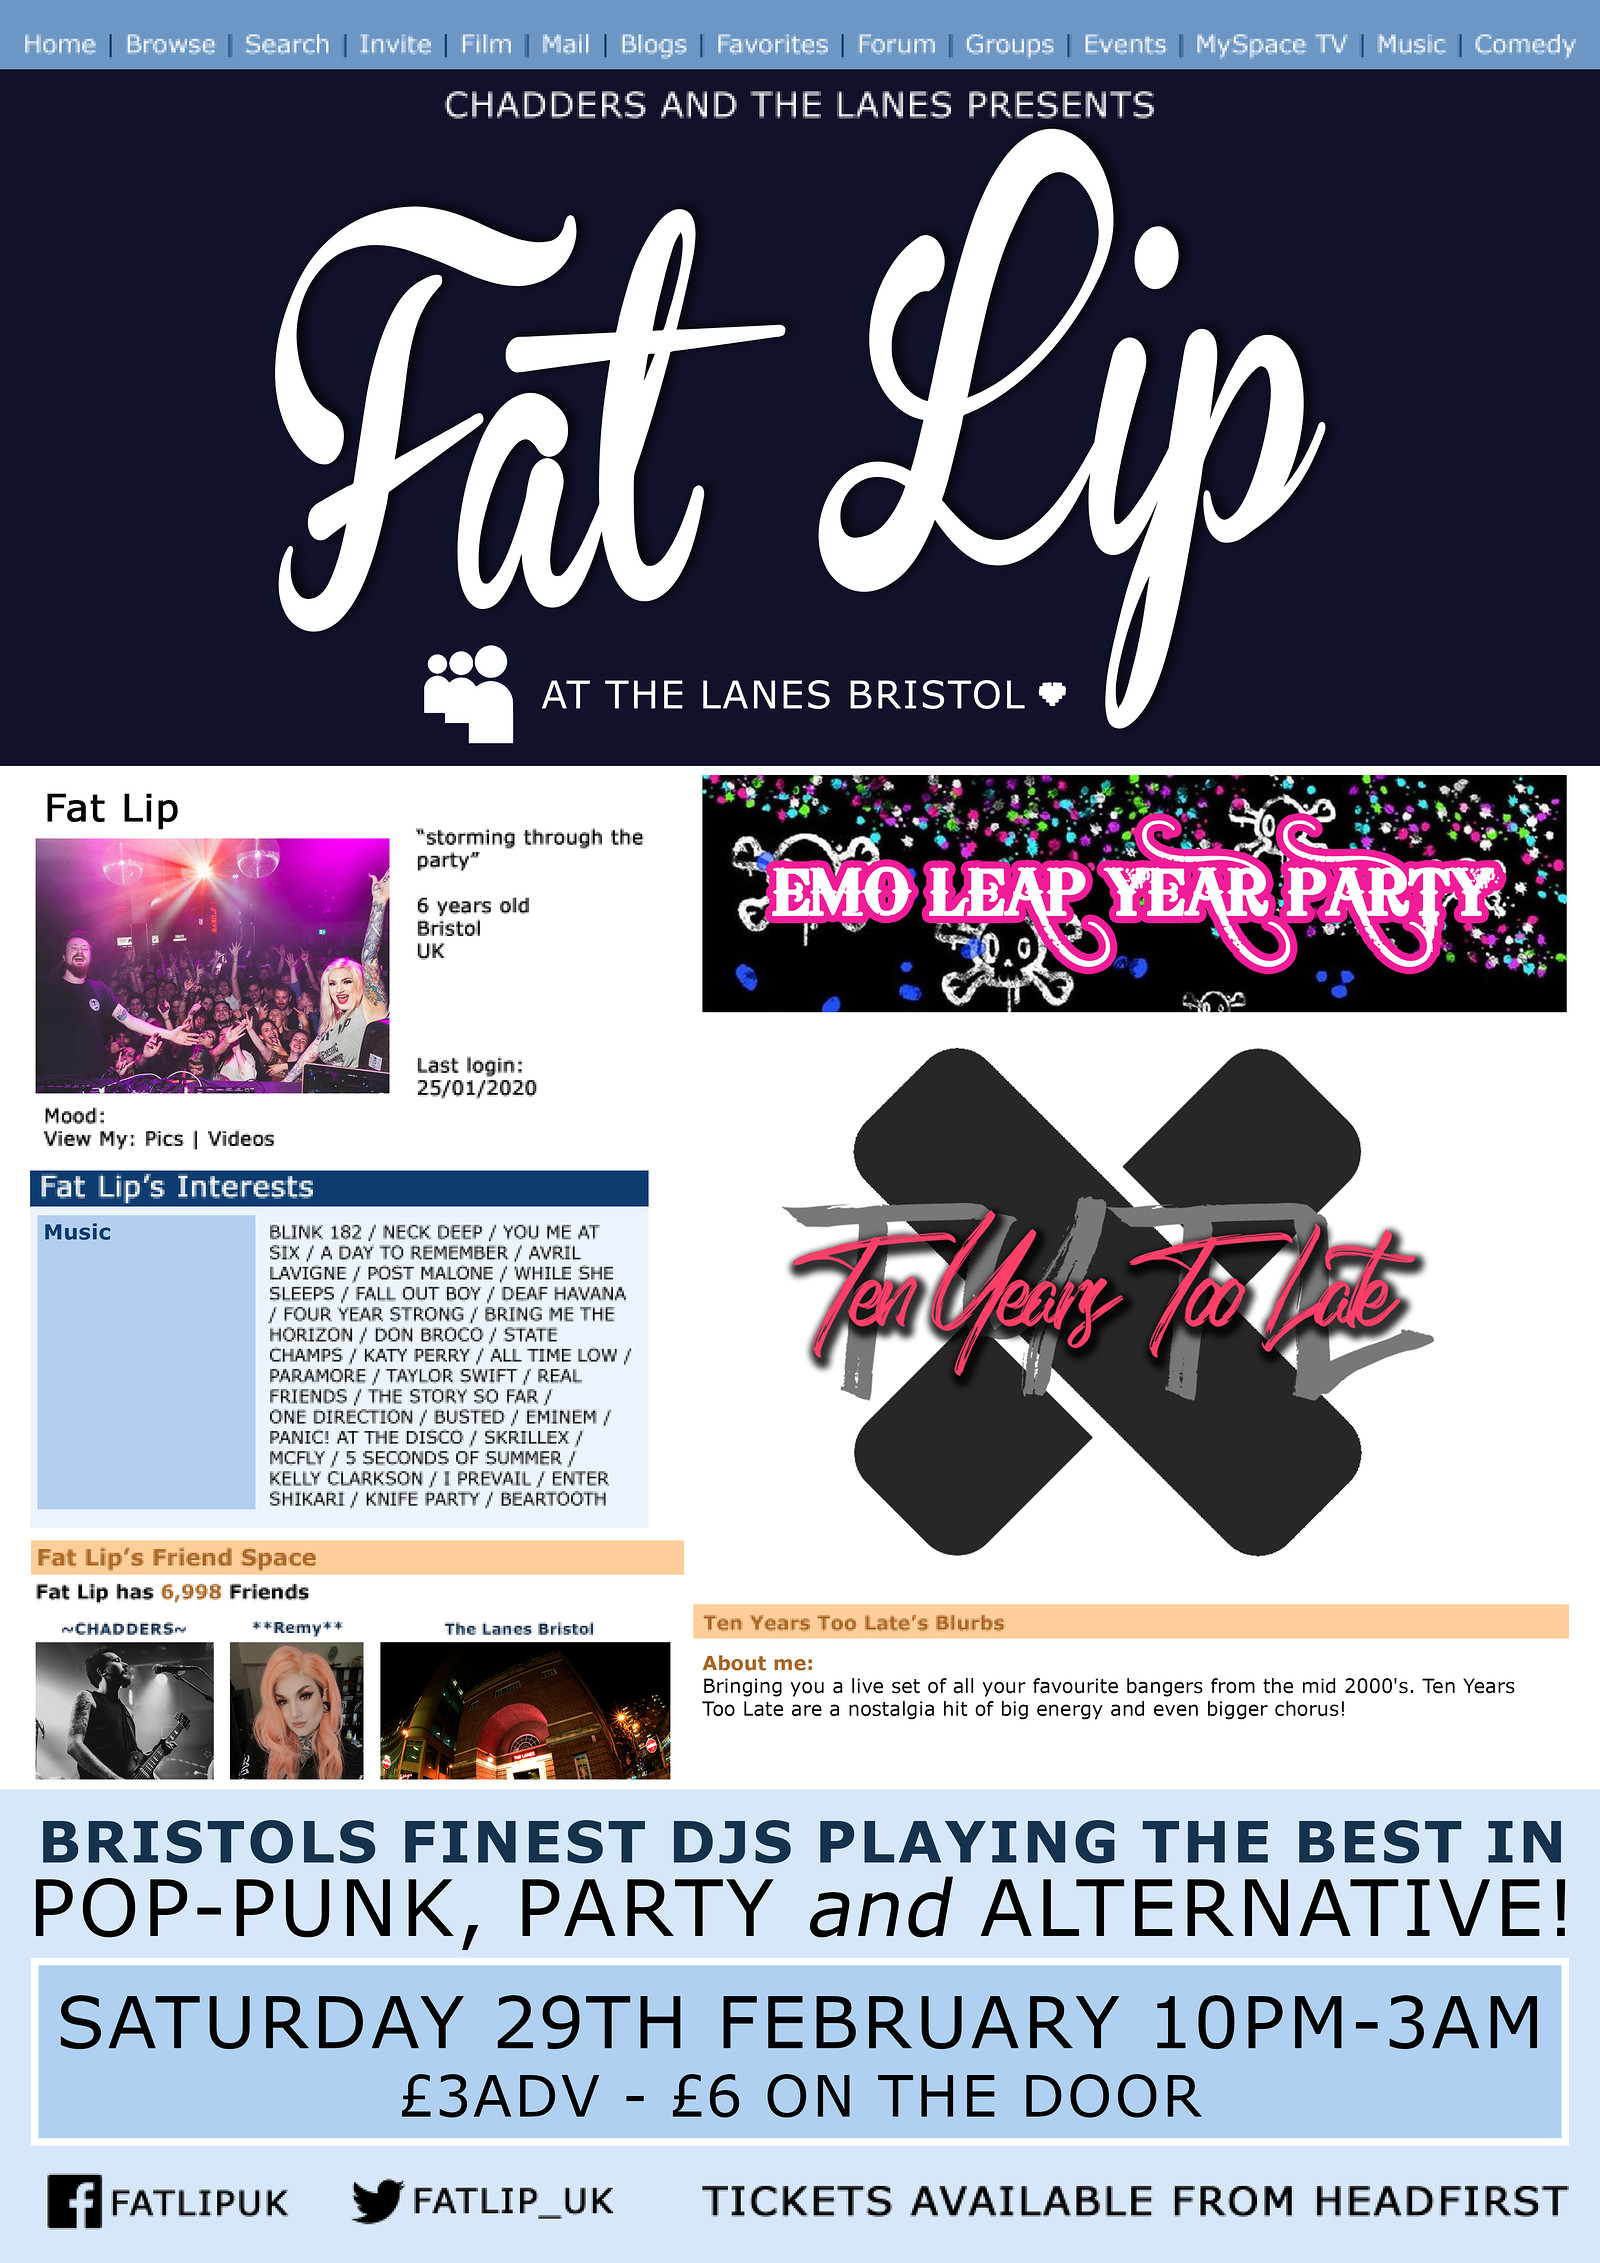 ★ FAT LIP ★ Emo Leap Year Party at The Lanes